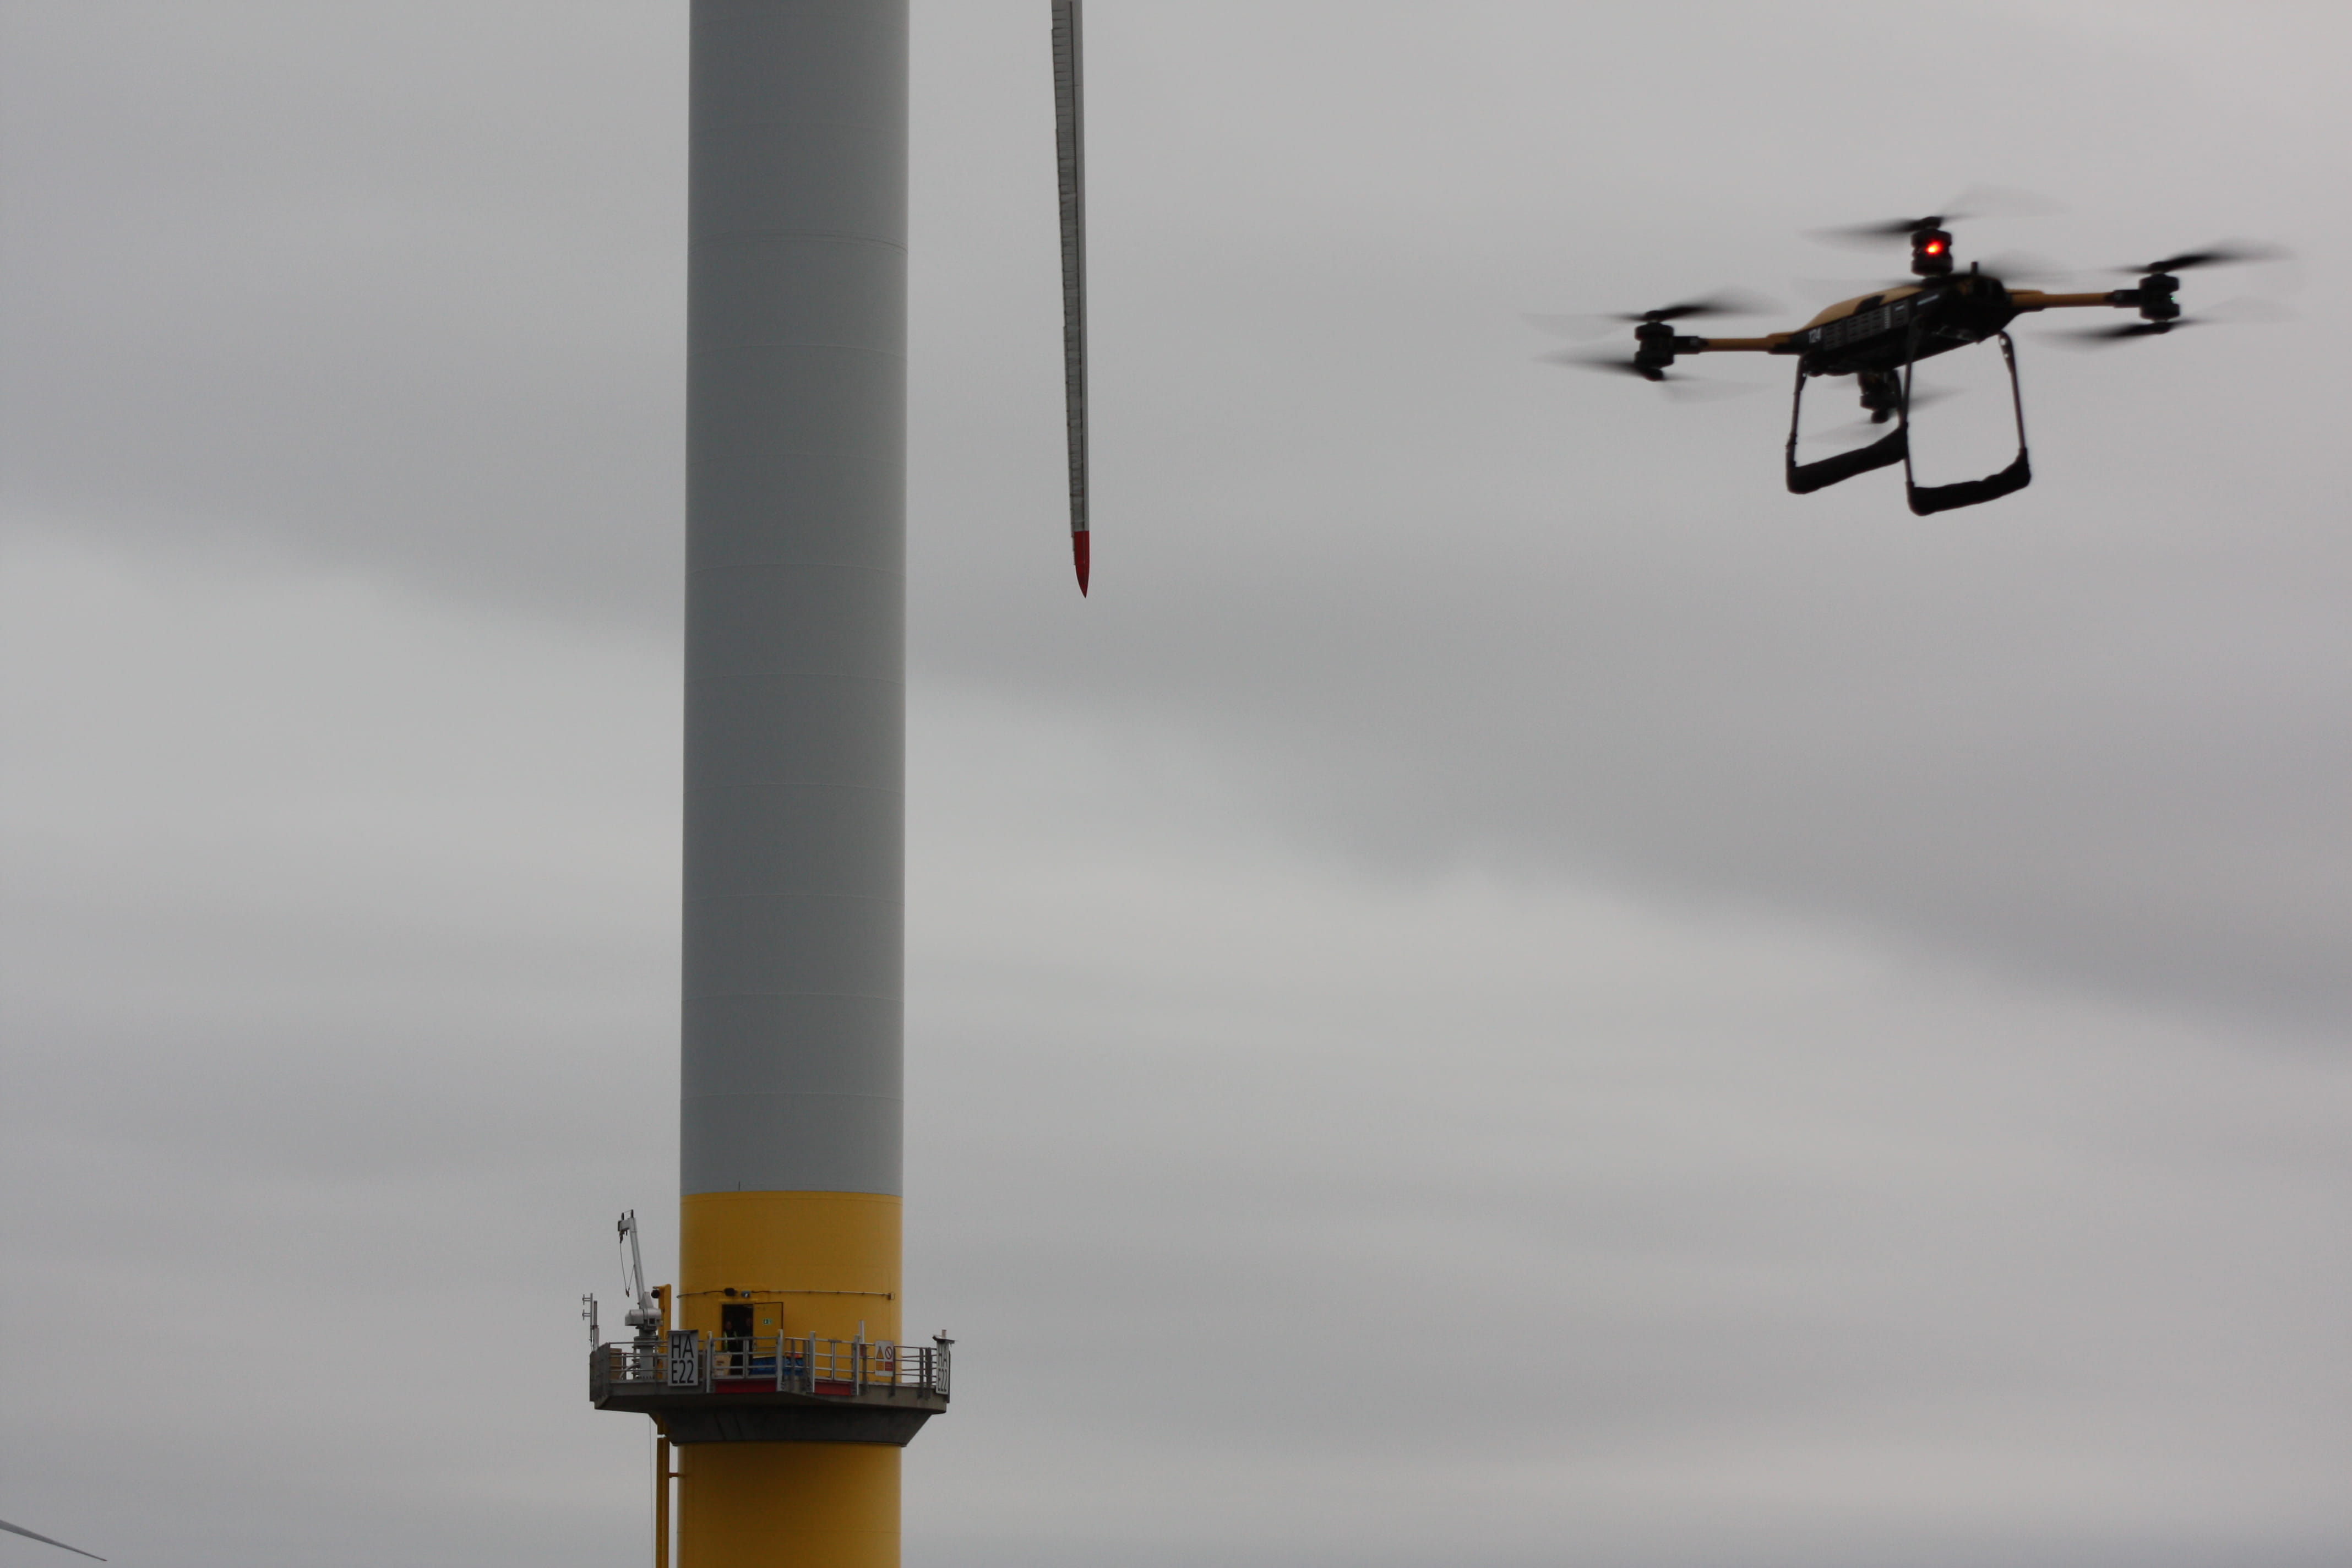 Drone in flight with offshore wind turbine in background